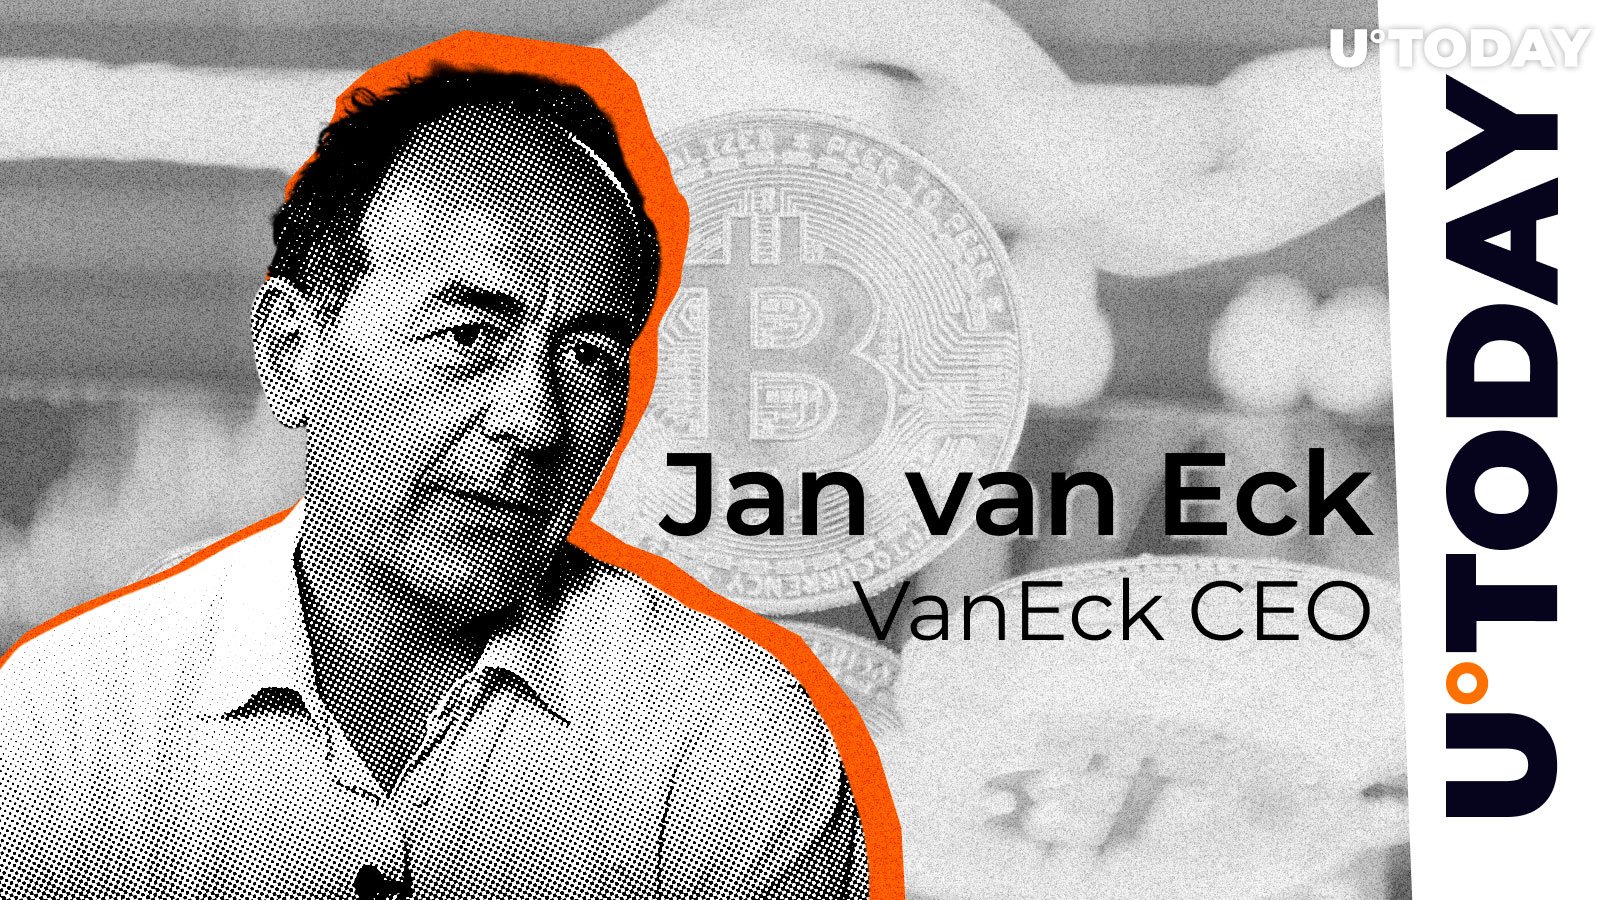 Bitcoin Price Predicted to Reach $350,000 by VanEck CEO